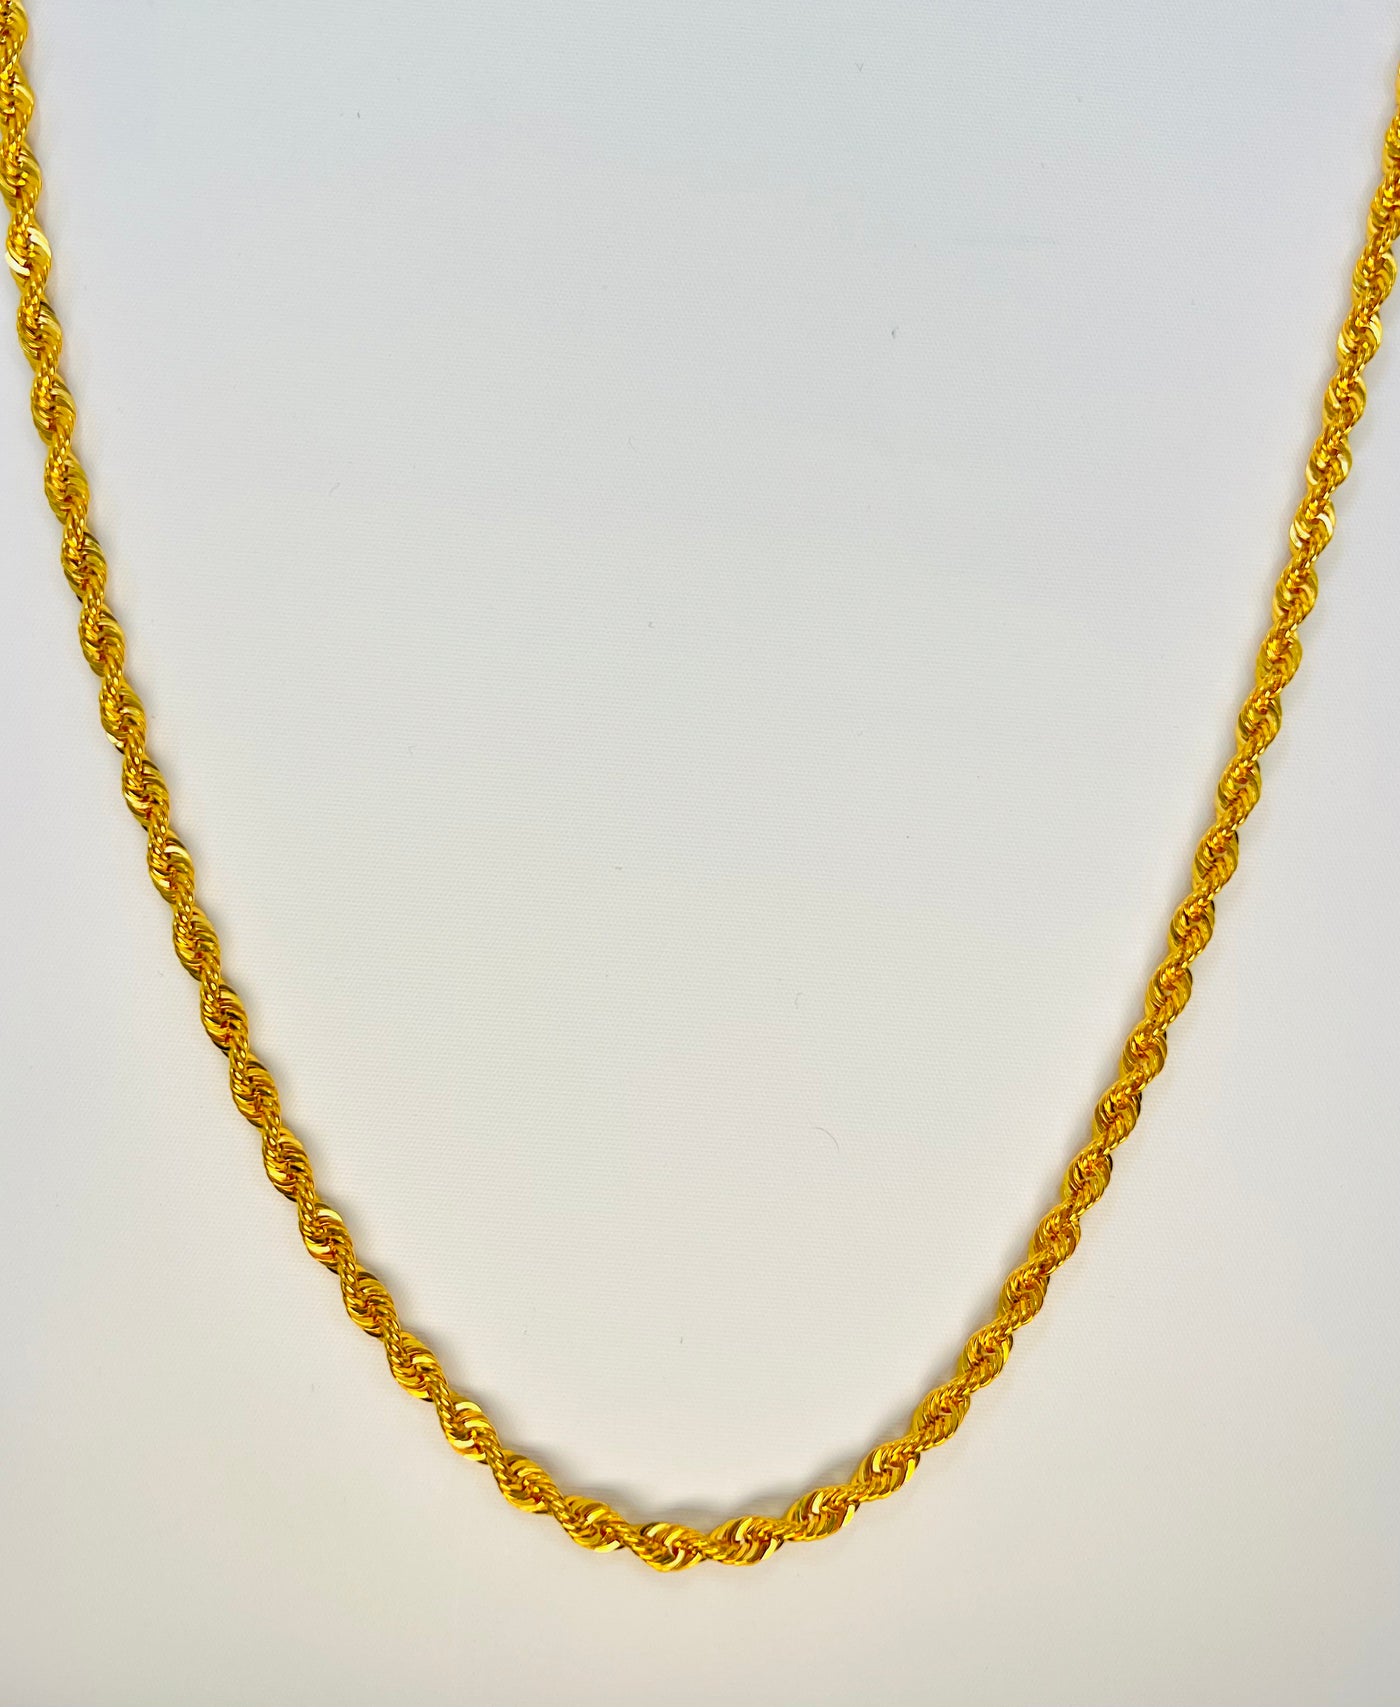 21k 6mm rope chain